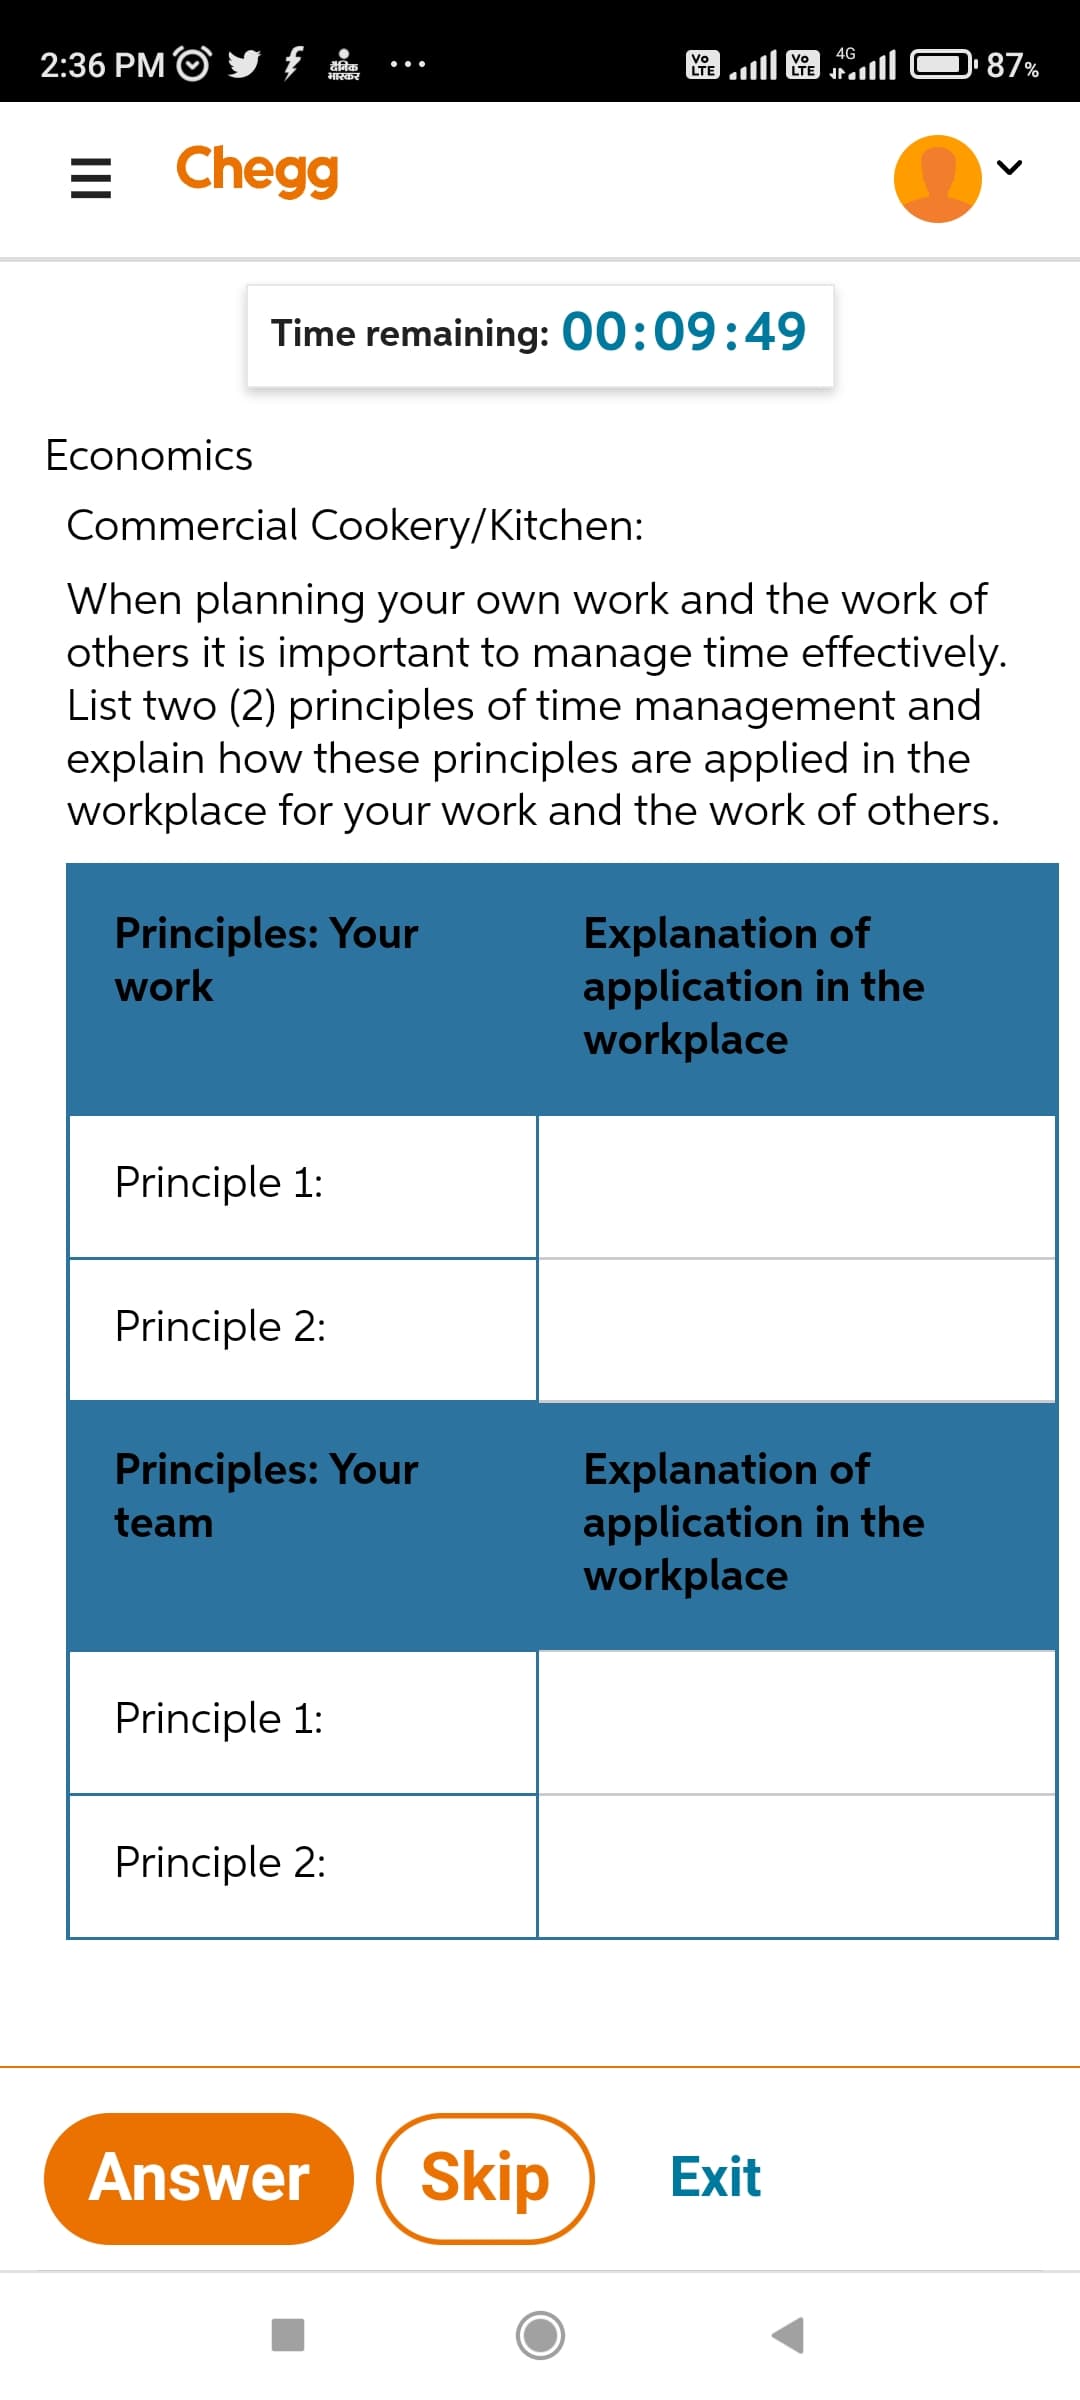 2:36 PM /
Vo
दैनिक
Vo
LTE
भास्कर
E
Chegg
Time remaining: 00:09:49
Economics
Commercial Cookery/Kitchen:
When planning your own work and the work of
others it is important to manage time effectively.
List two (2) principles of time management and
explain how these principles are applied in the
workplace for your work and the work of others.
Principles: Your
Explanation of
work
application in the
workplace
Principle 1:
Principle 2:
Principles: Your
Explanation of
application in the
team
workplace
Principle 1:
Principle 2:
Answer Skip
Exit
4G
87%